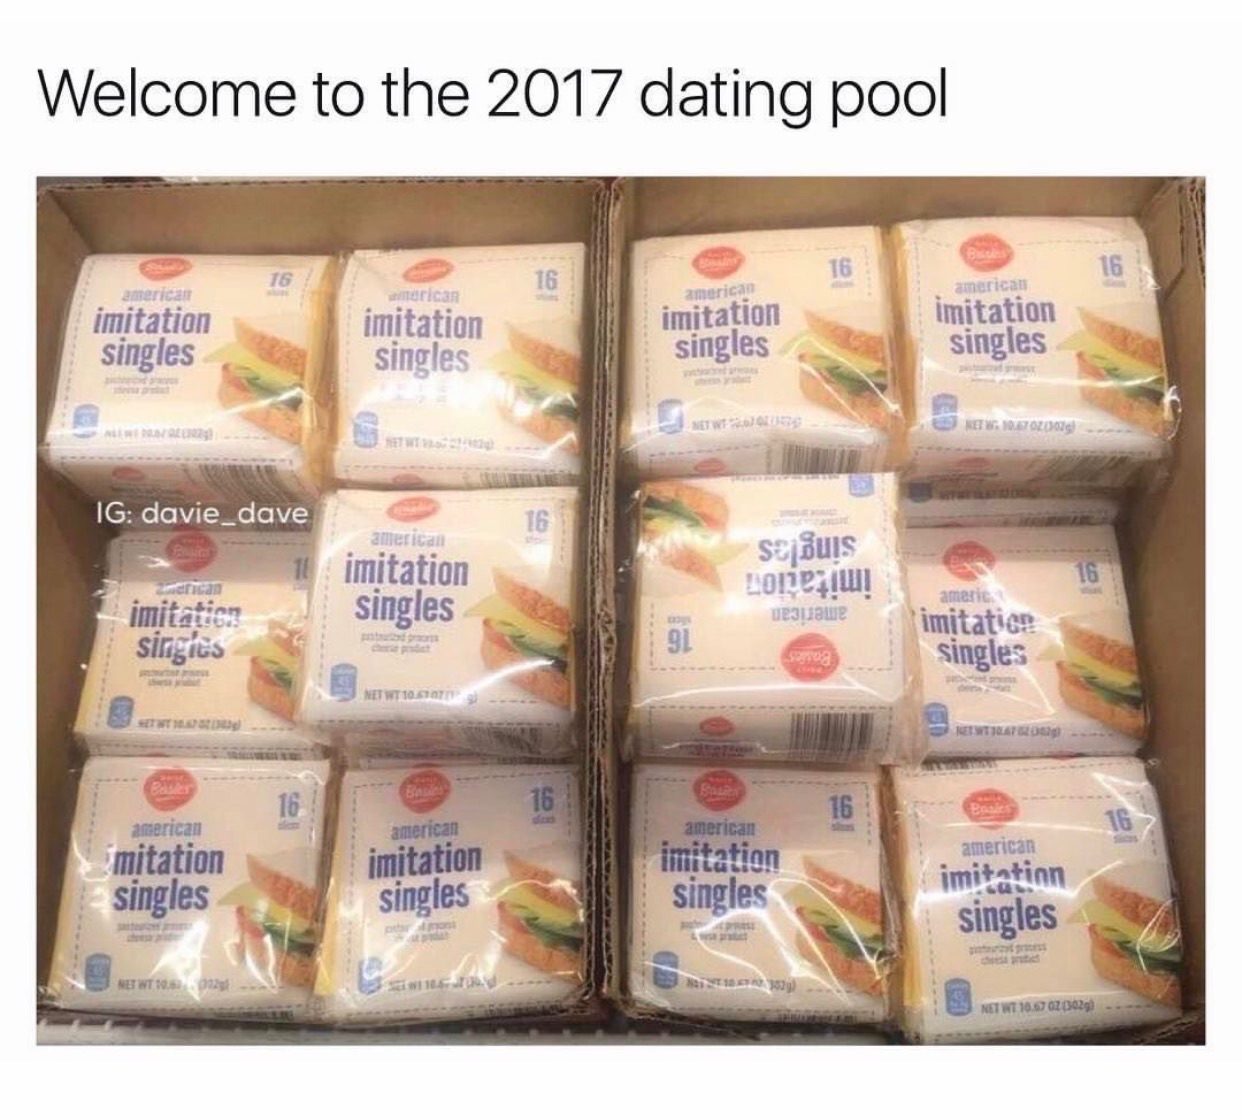 memes - singles in your area - Welcome to the 2017 dating pool american american america orce imitation singles imitation singles imitation singles imitation singles NETW1007020025 Ig davie_dave american Sajours LoneW! imitation singles man americ 0311awe